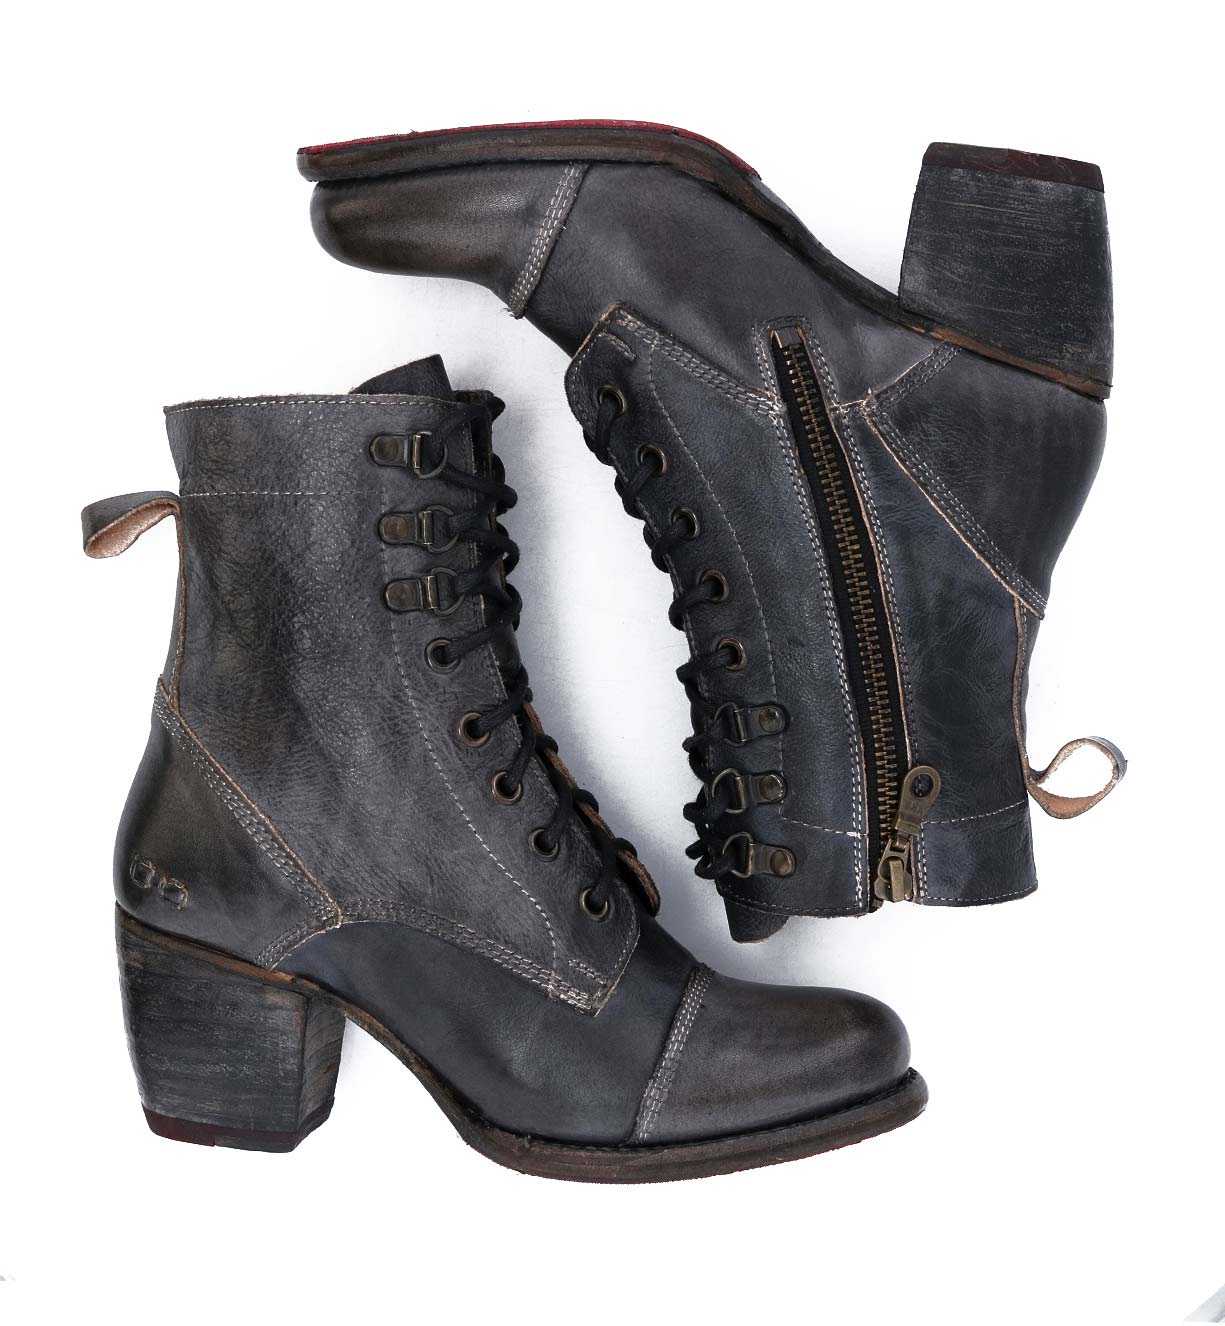 A pair of Bed Stu Judgement women's black leather ankle boots.